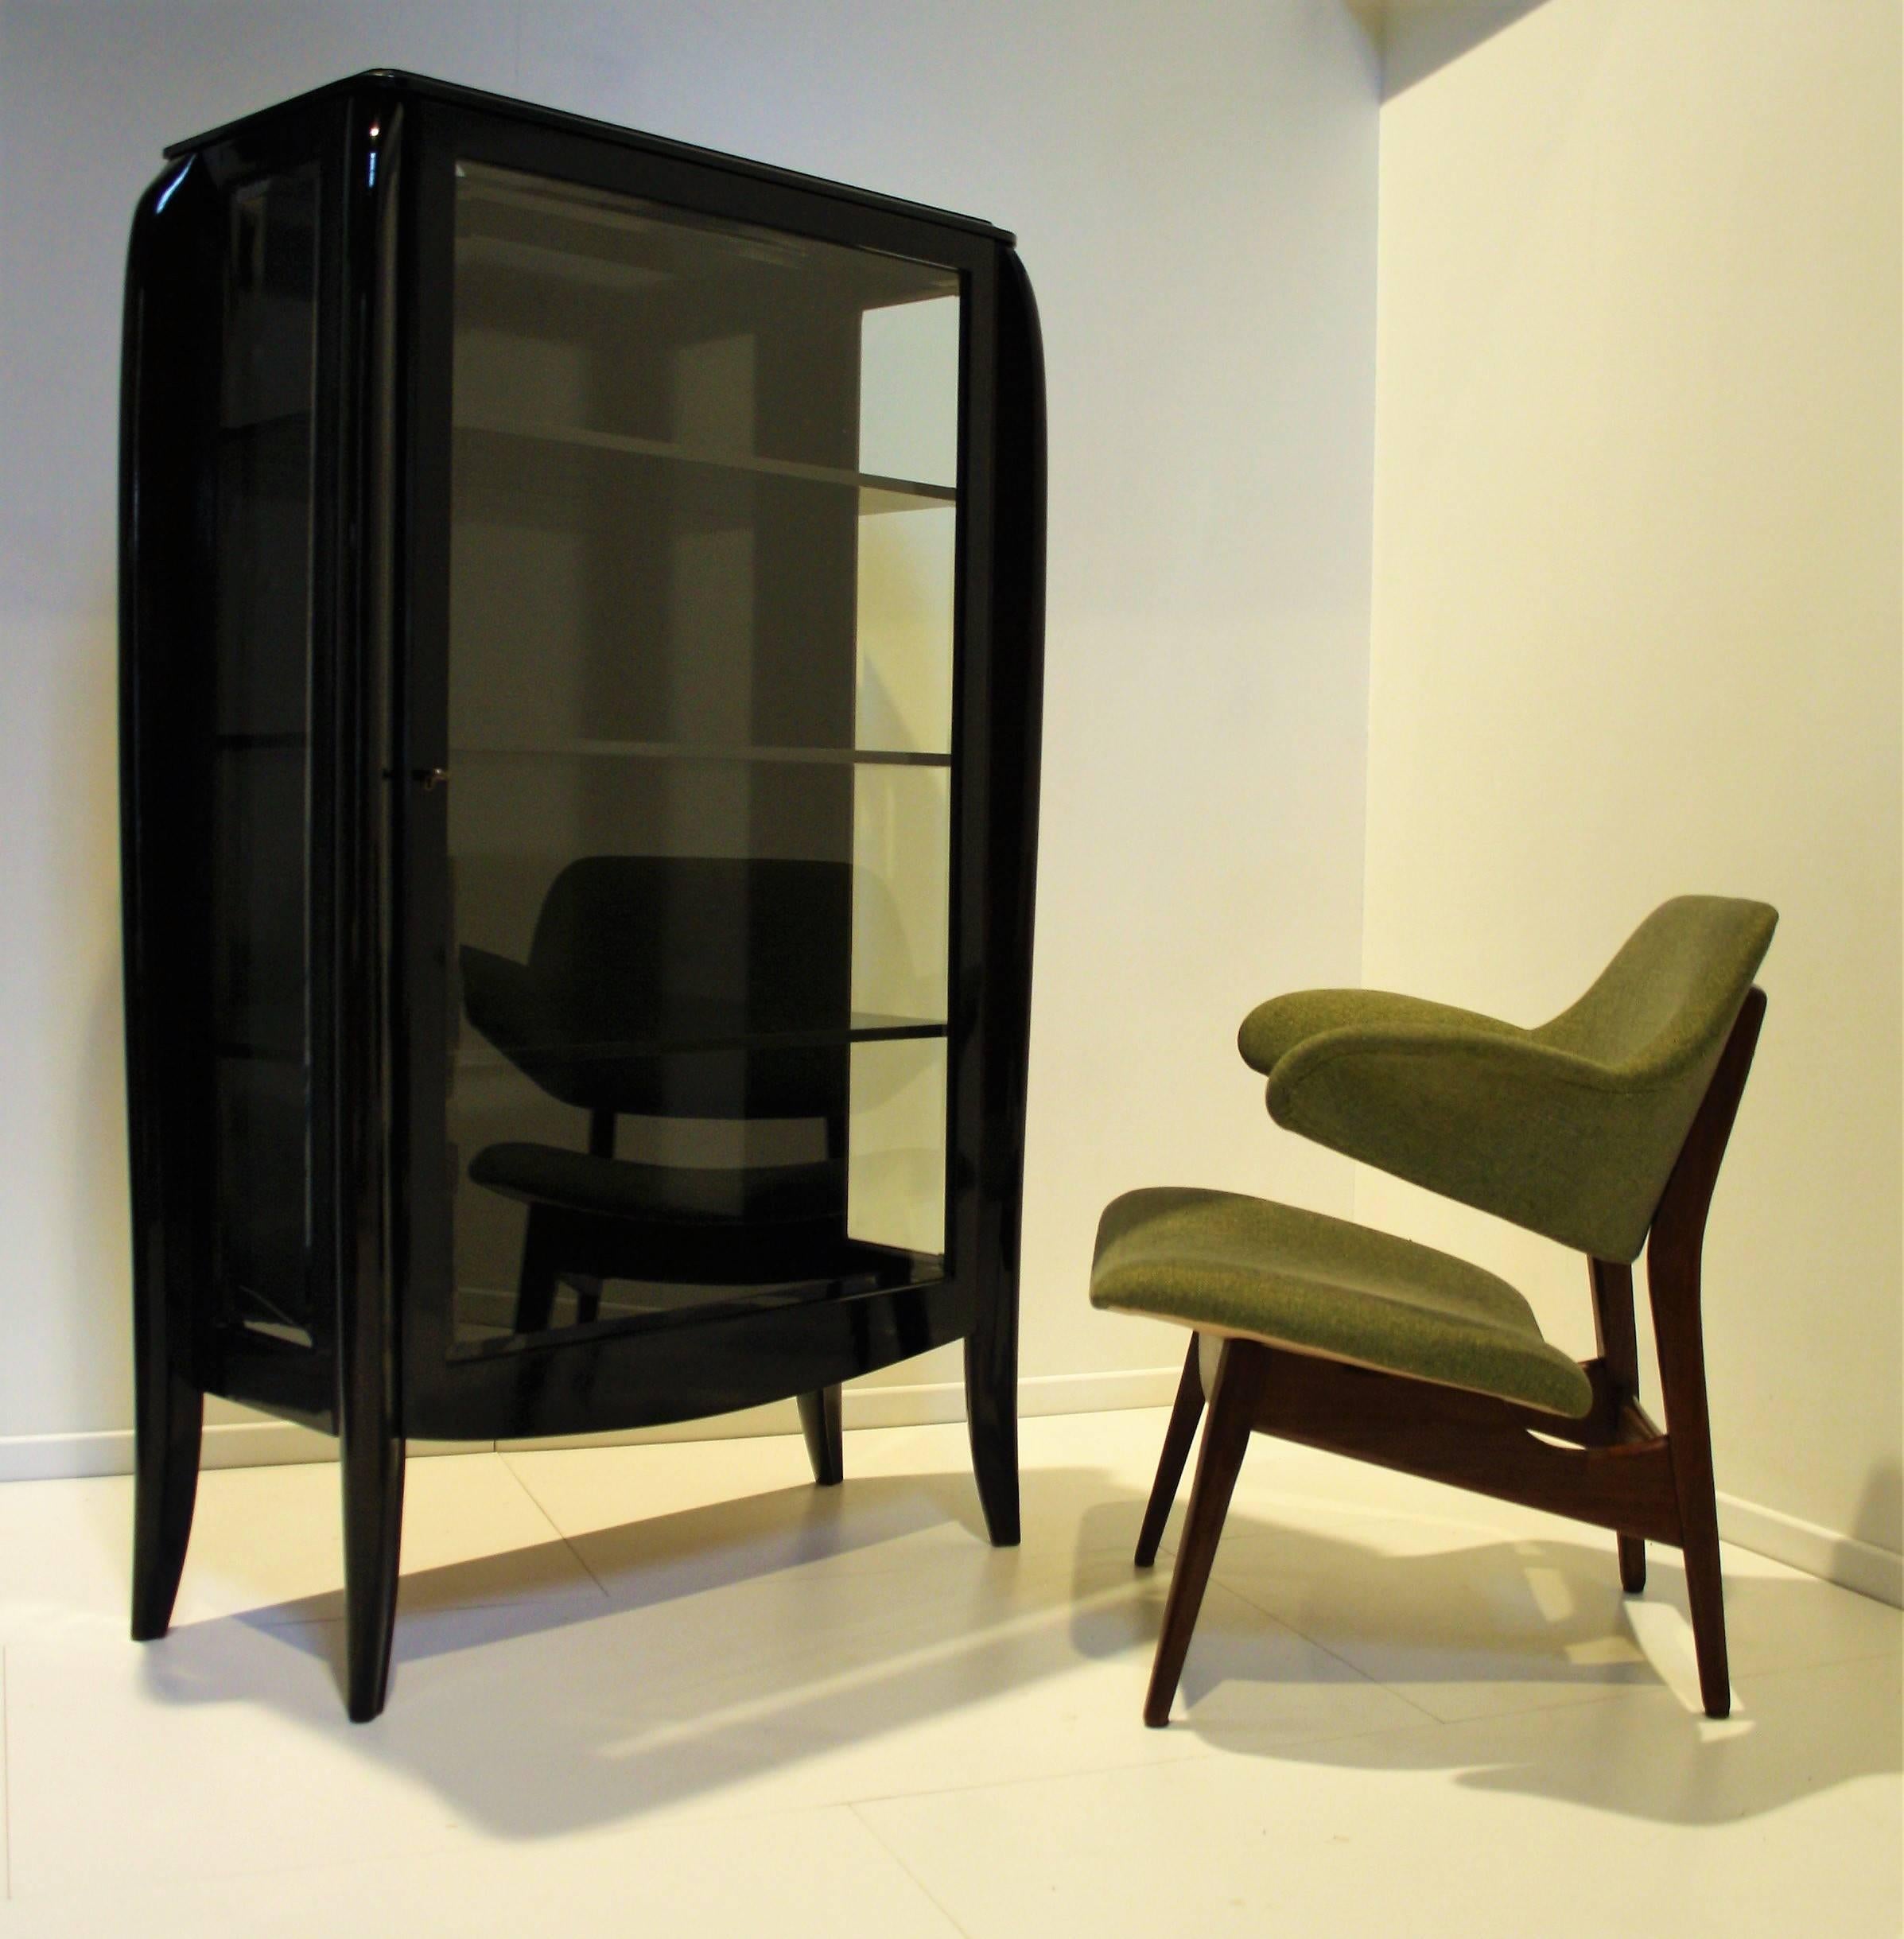 Elegant and refined French Art Deco display cabinet in blackened wood and bevelled glasses from Dominique.
In very good condition with original polishing.